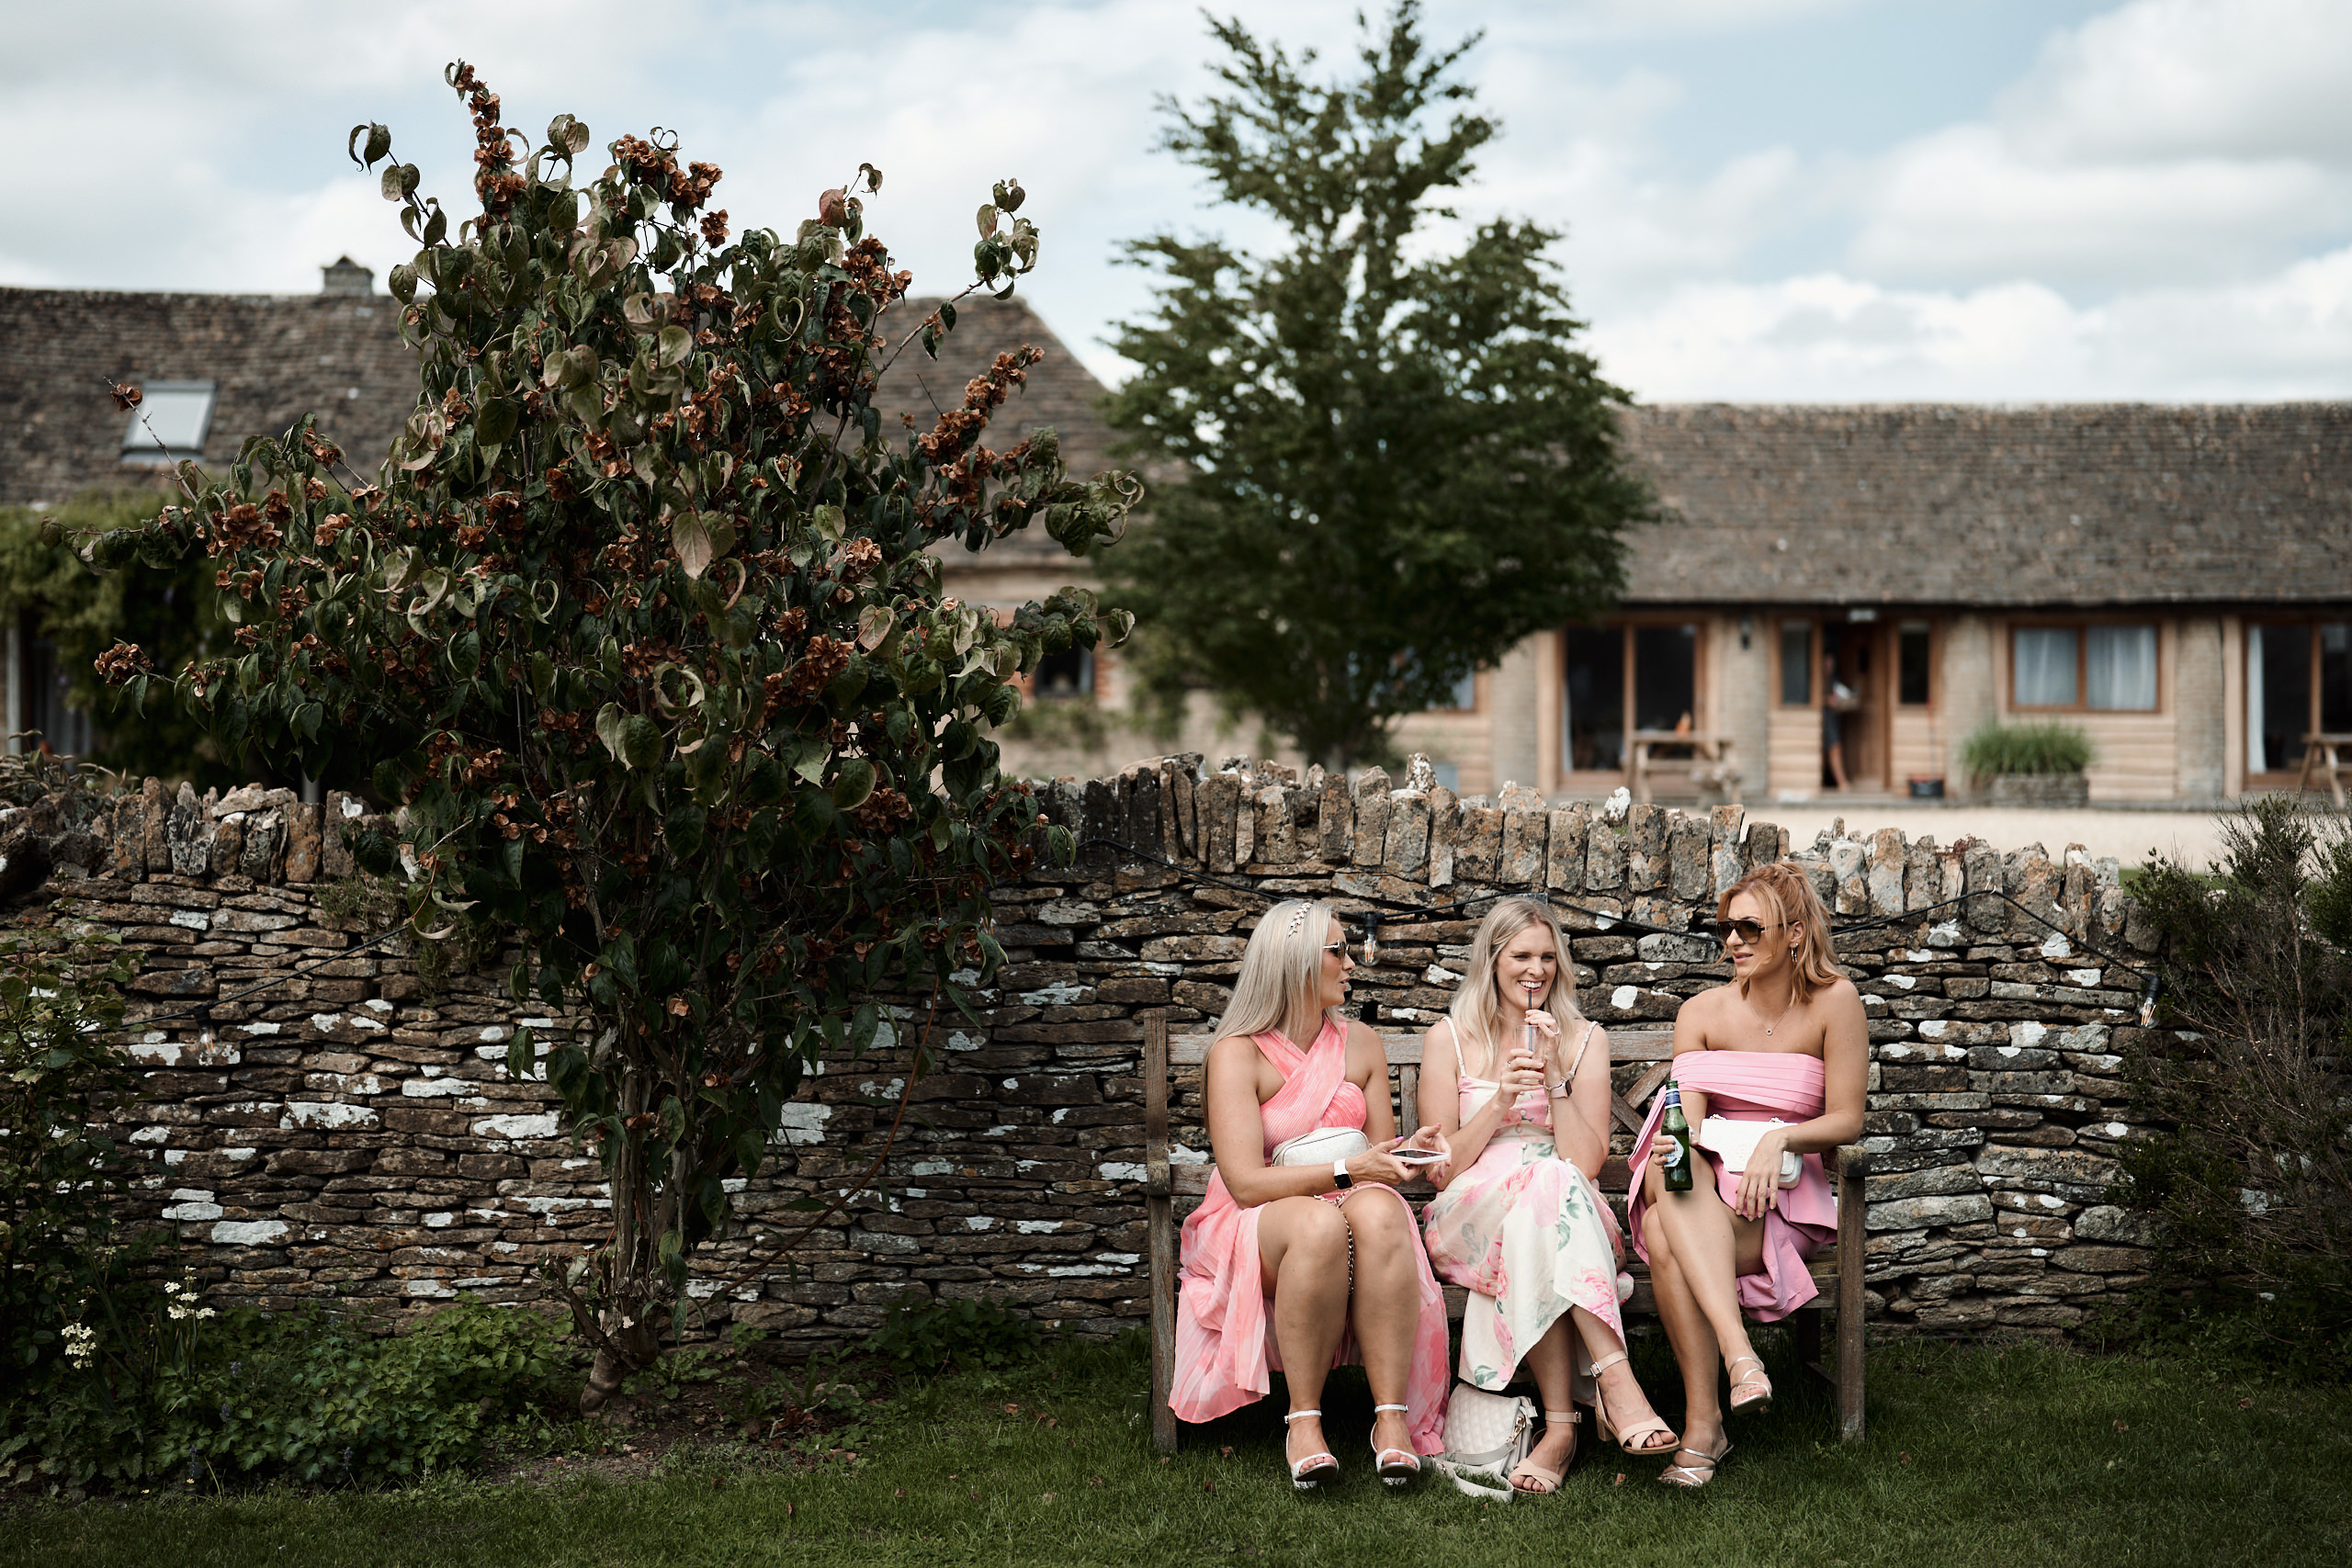 Four bridesmaids are chilling on a bench in front of a brick wall.